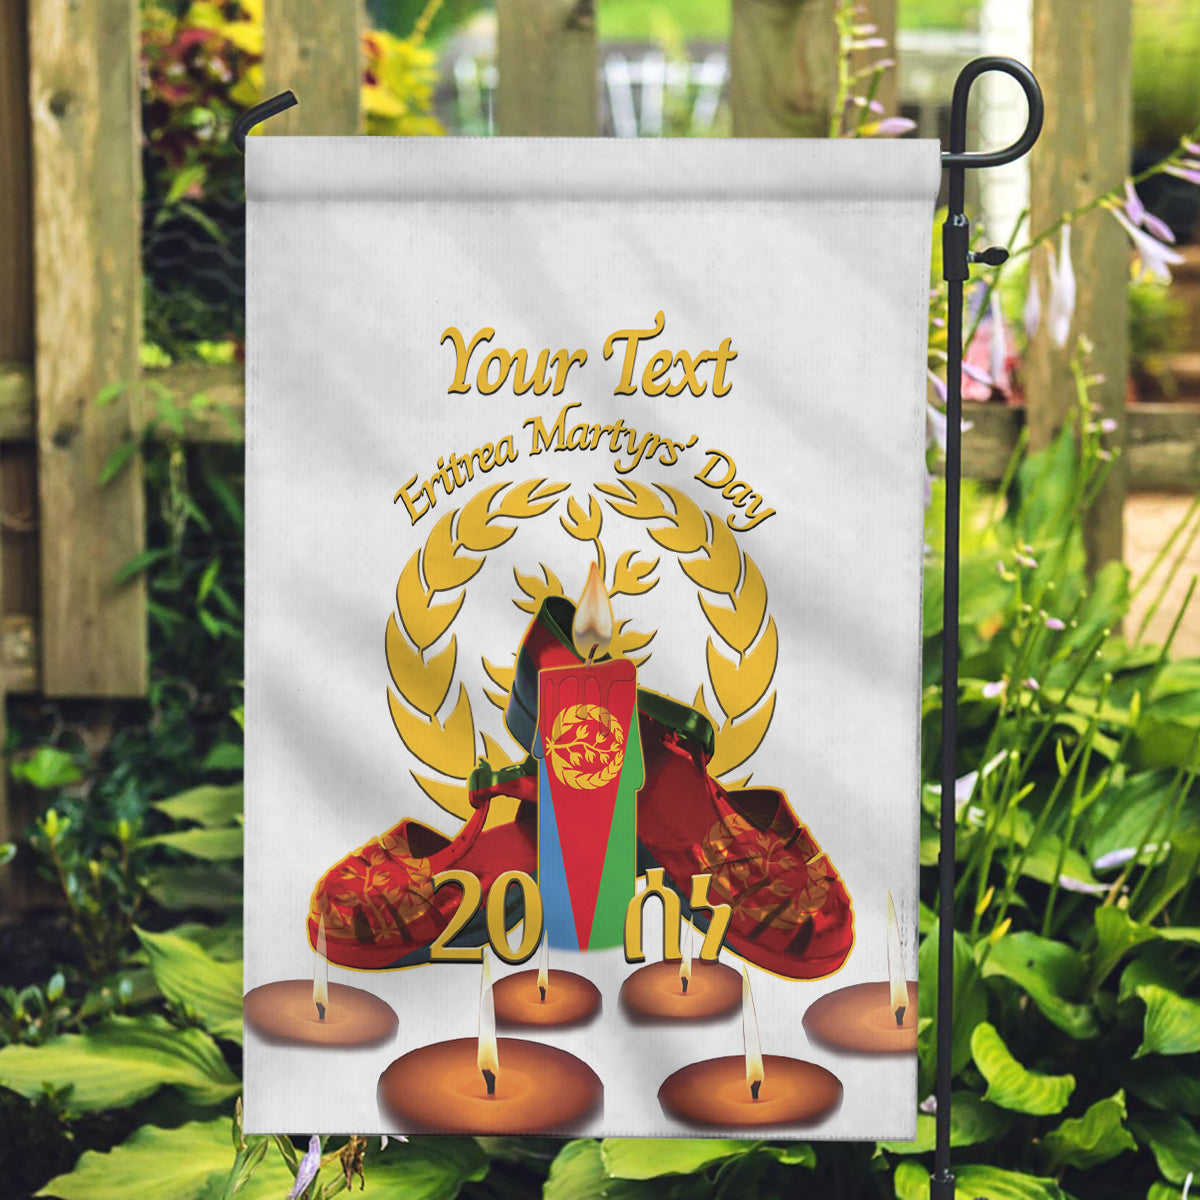 Custom Eritrea Martyrs' Day Garden Flag 20 June Shida Shoes With Candles - White